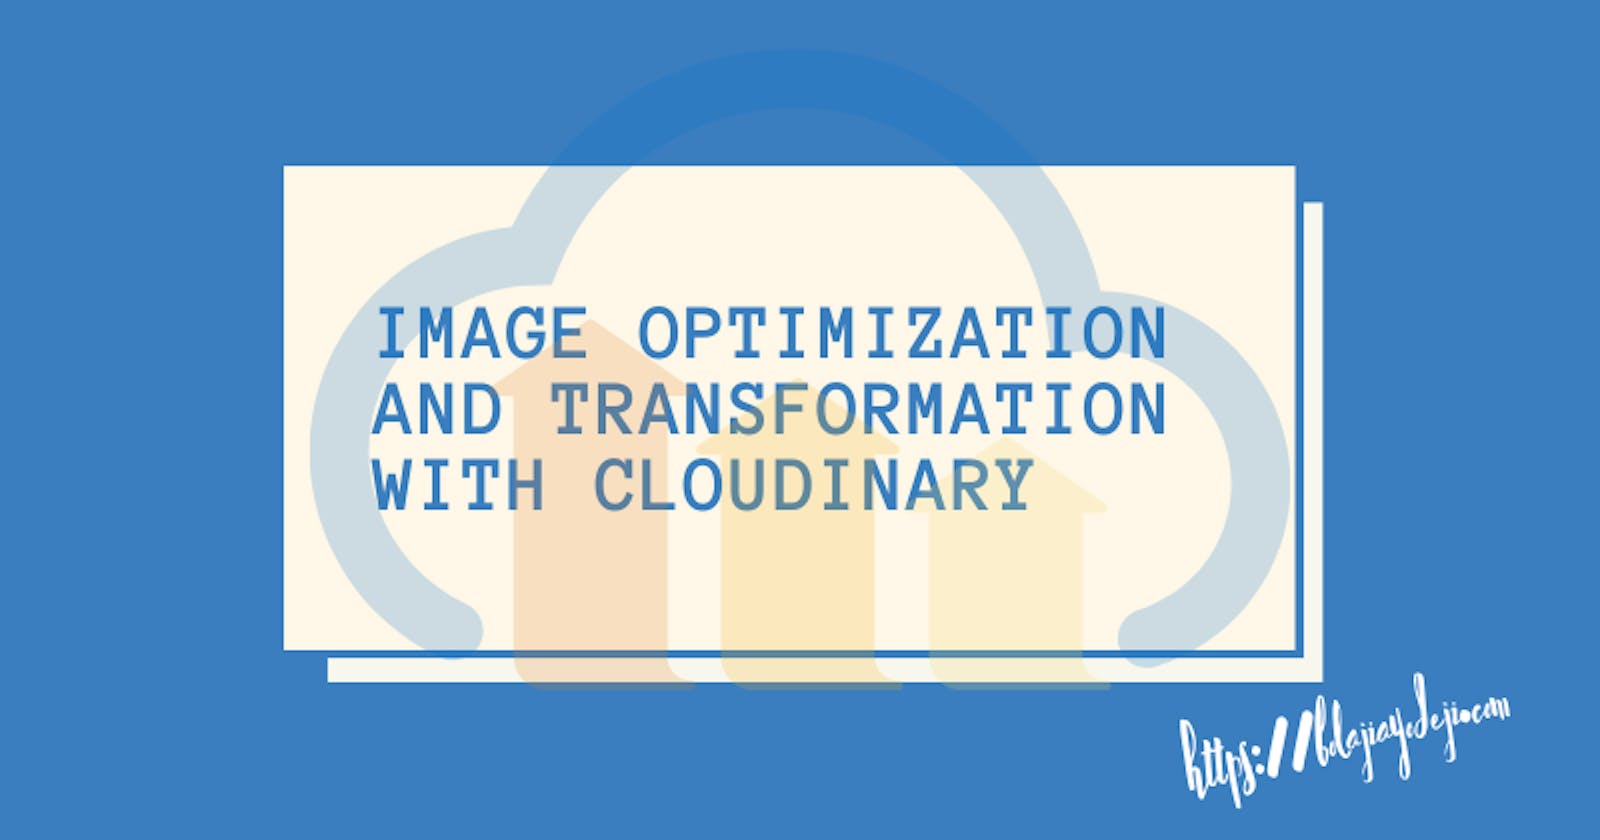 Image Optimization and Transformation with Cloudinary